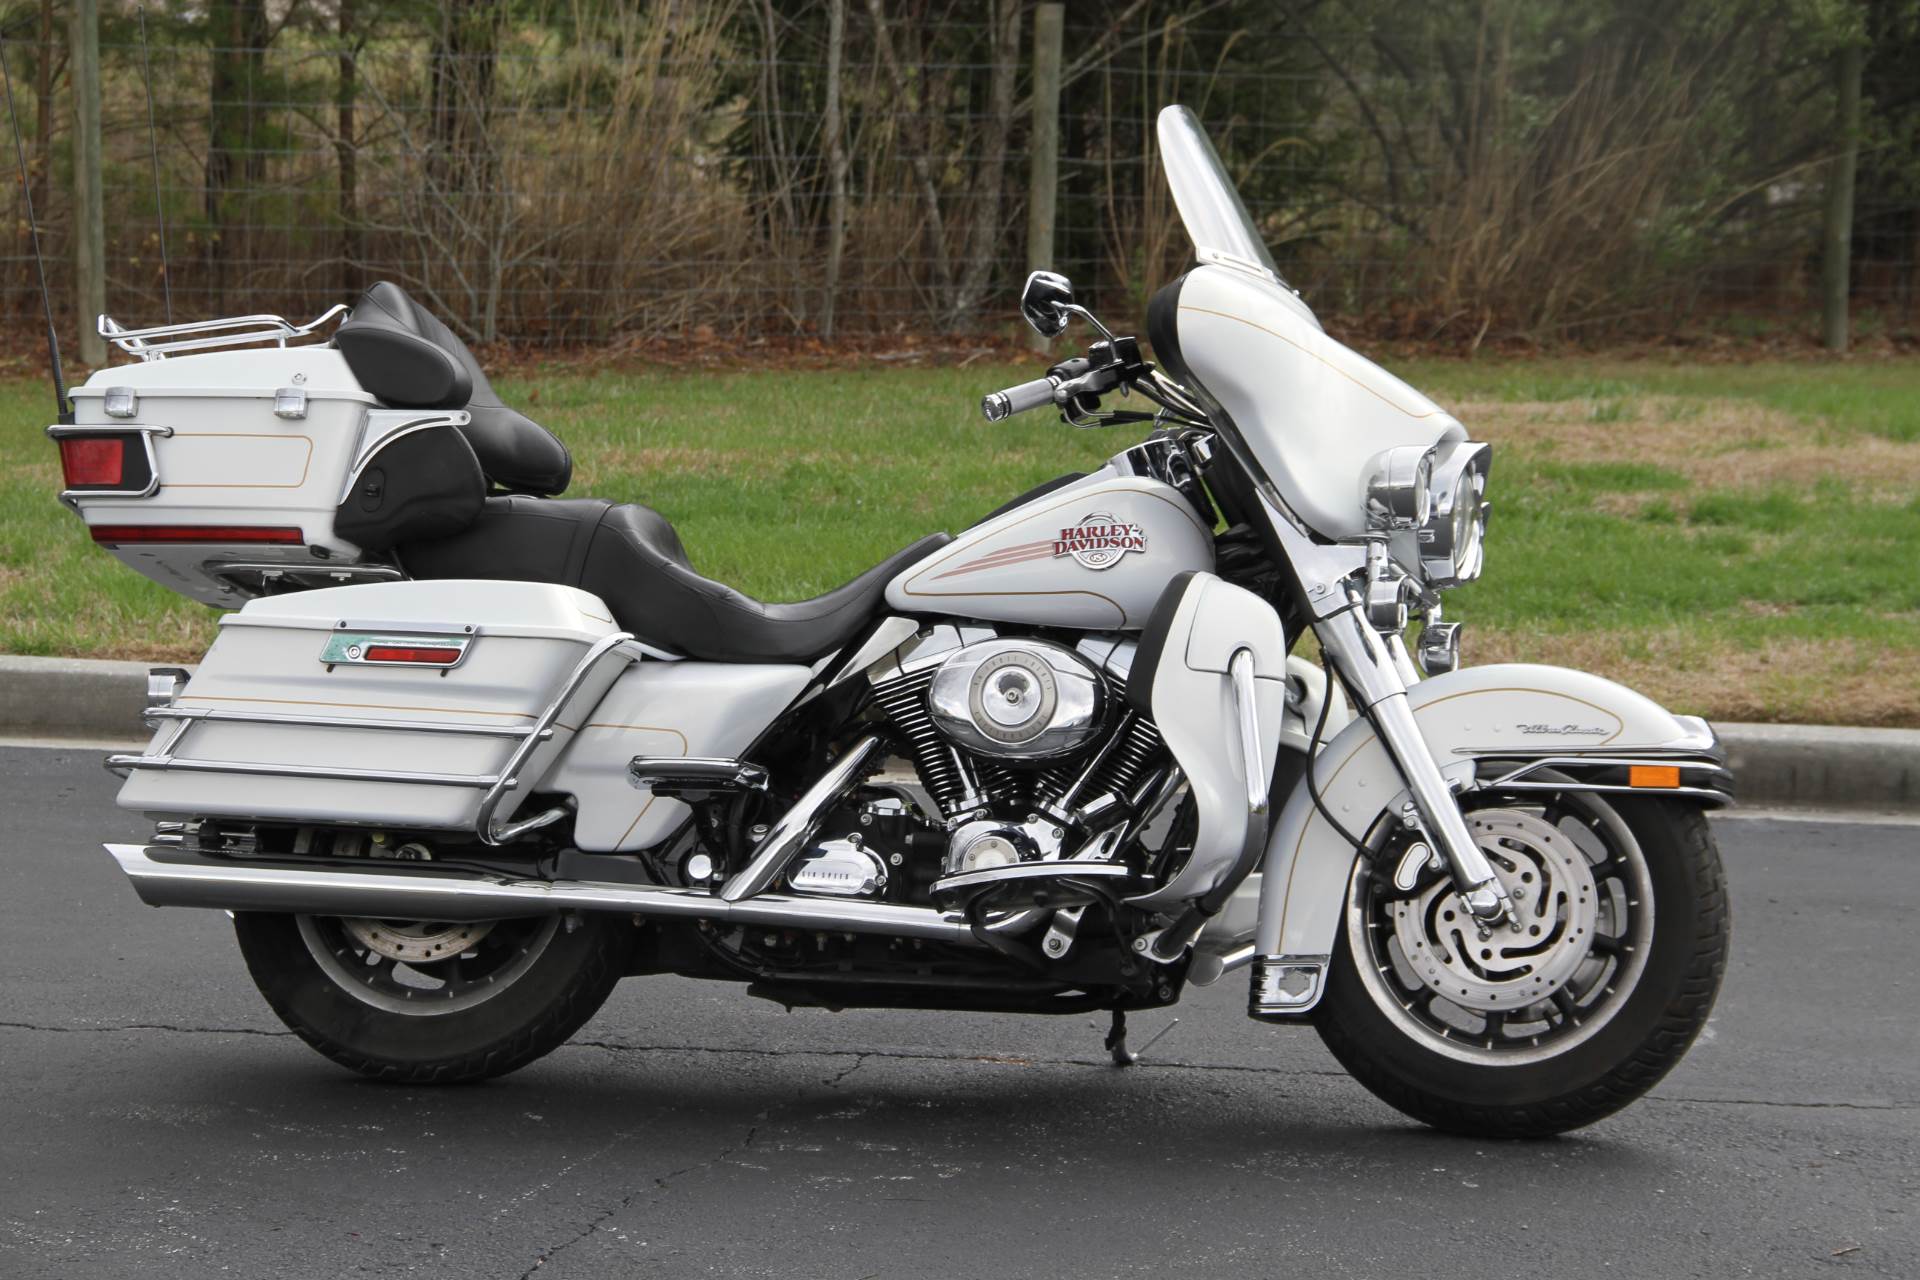 Used 2007 Harley Davidson Ultra Classic Electra Glide 